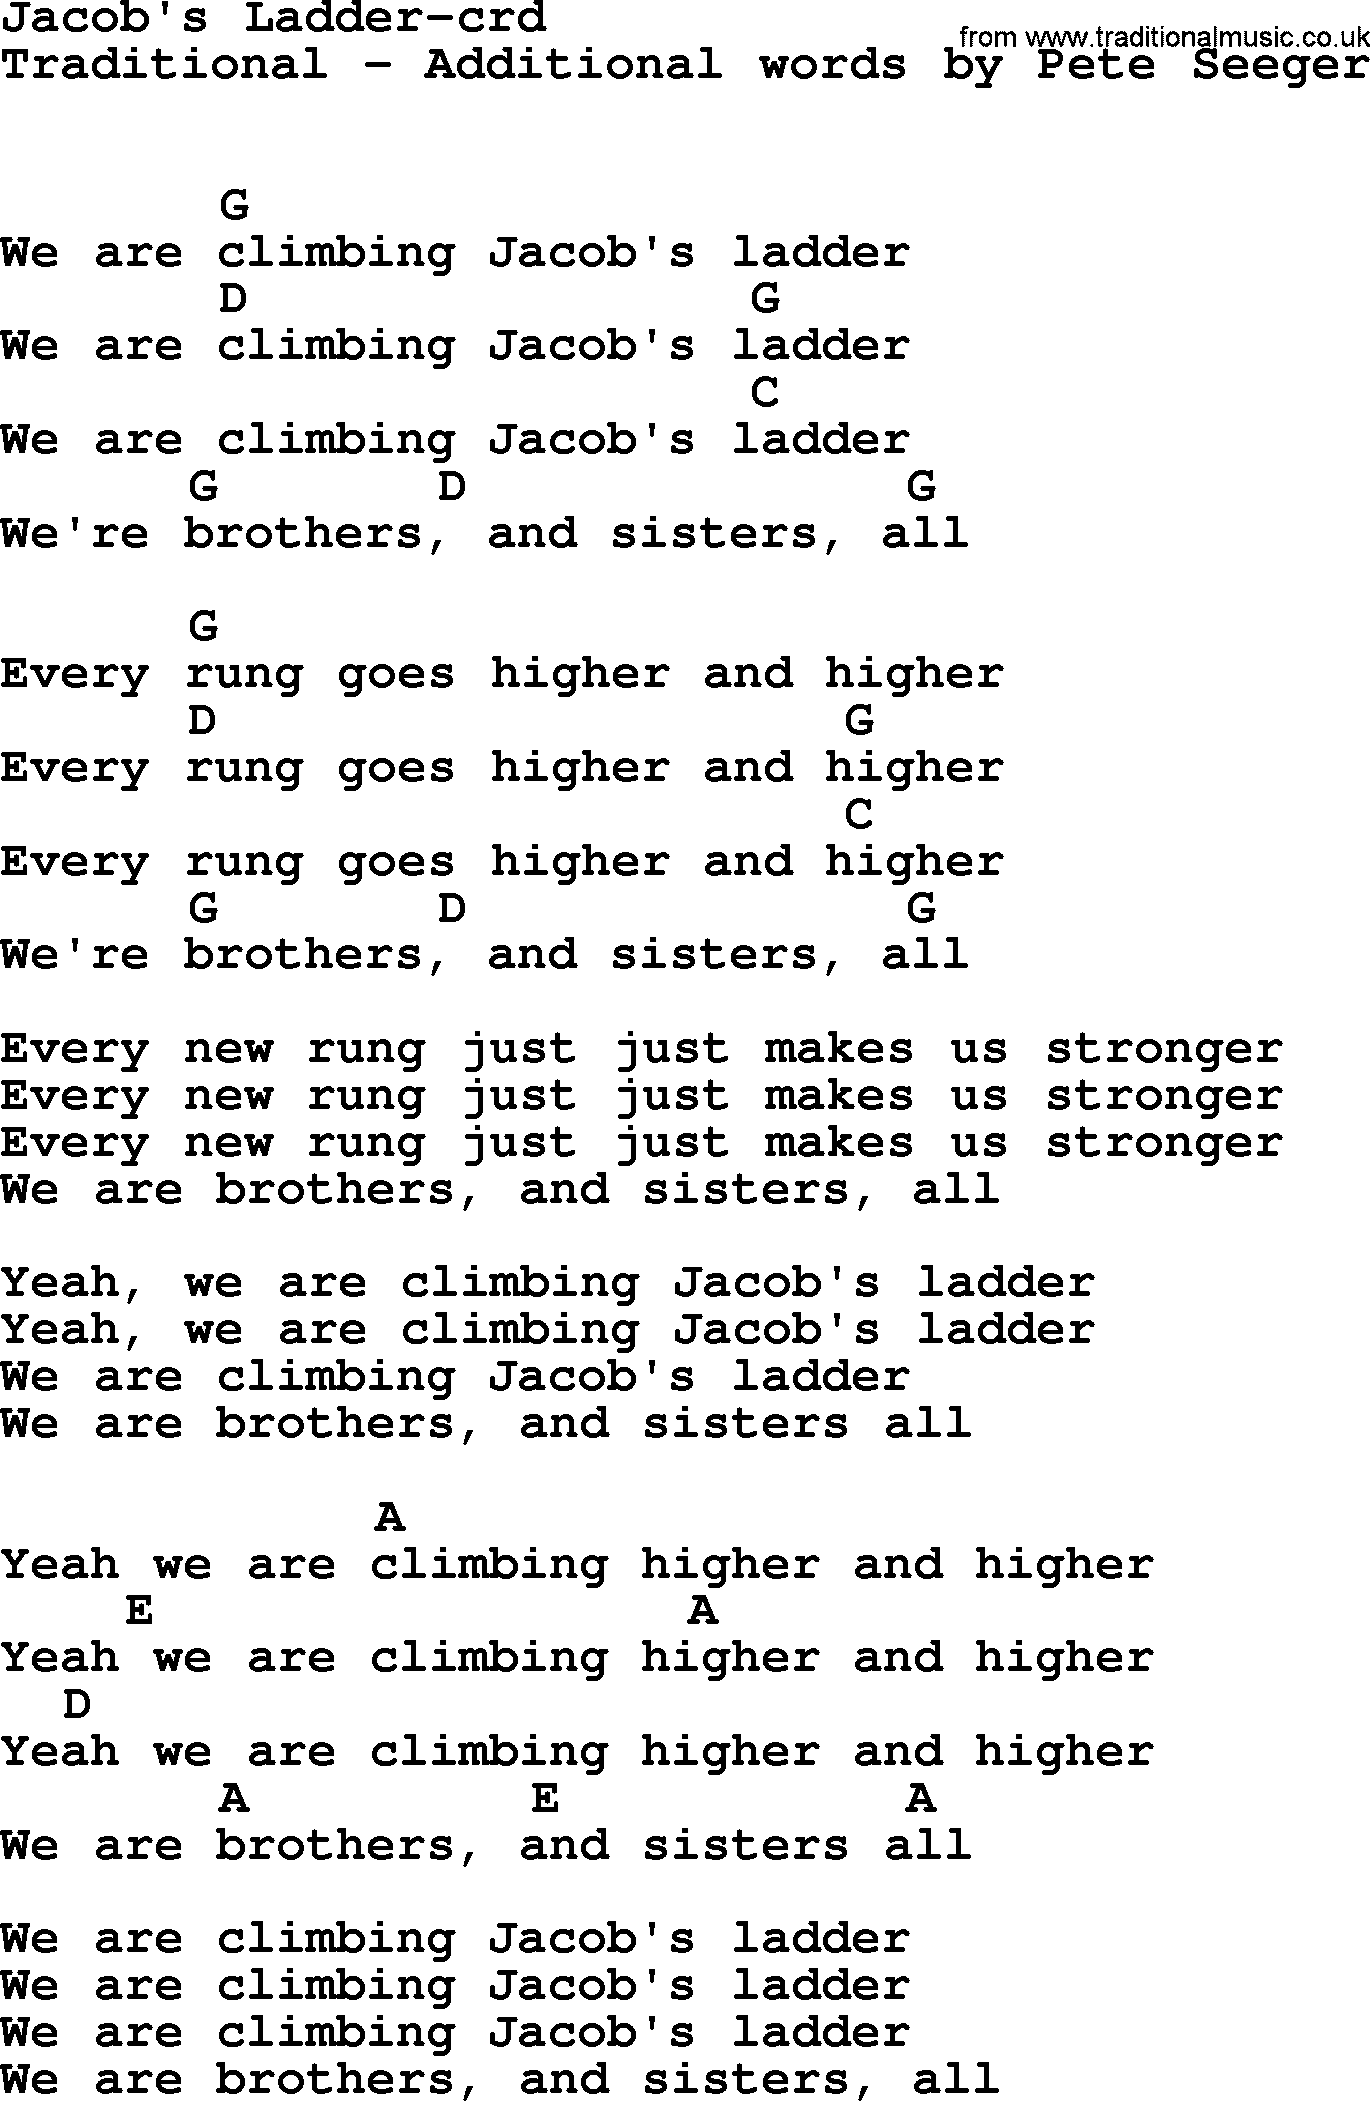 Bruce Springsteen song: Jacob's Ladder, lyrics and chords